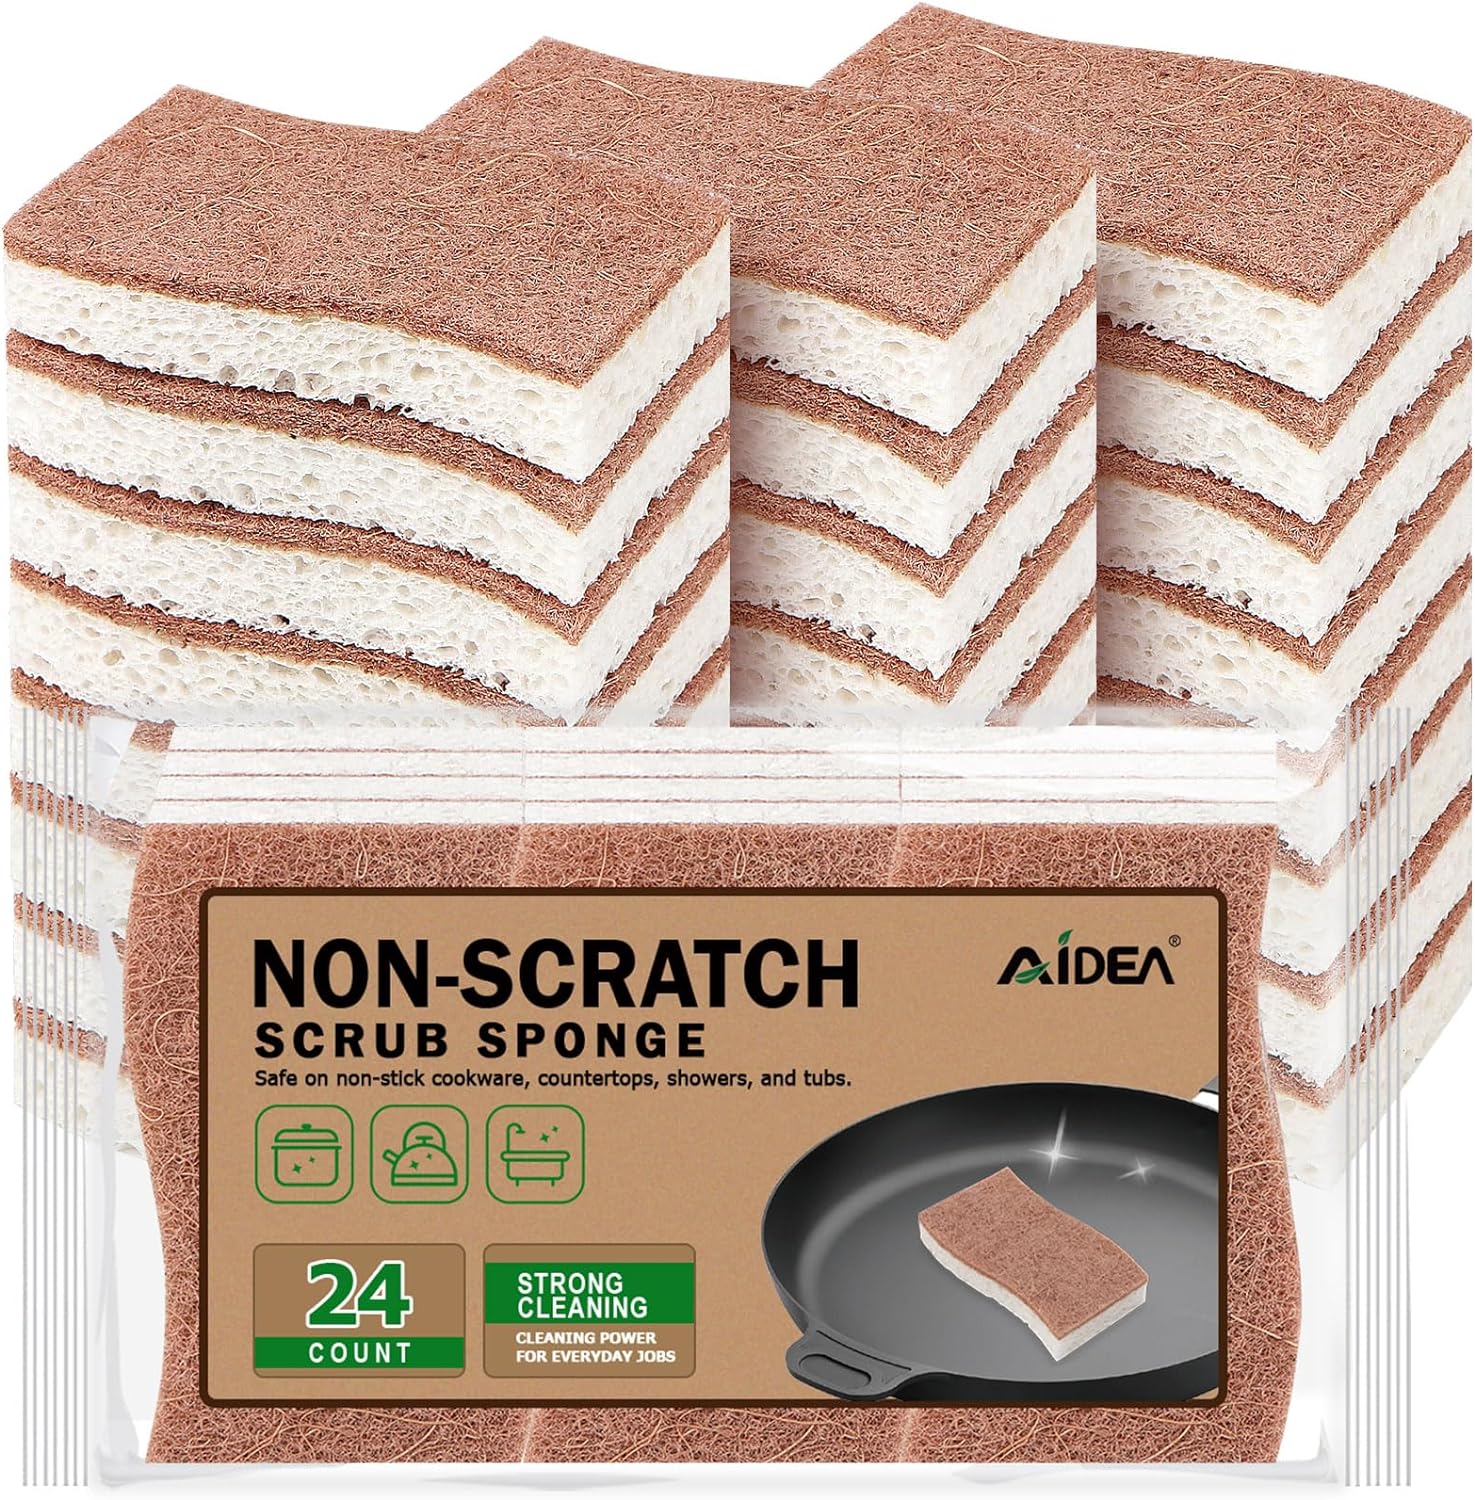 AIDEA Non-Scratch Scrub Sponge-24Count, Natural Sponges for Non-Stick Cookware, Sponges Kitchen, Cellulose Sponges for Dishes, Cleaning Sponge for Kitchen, Bathroom, Household